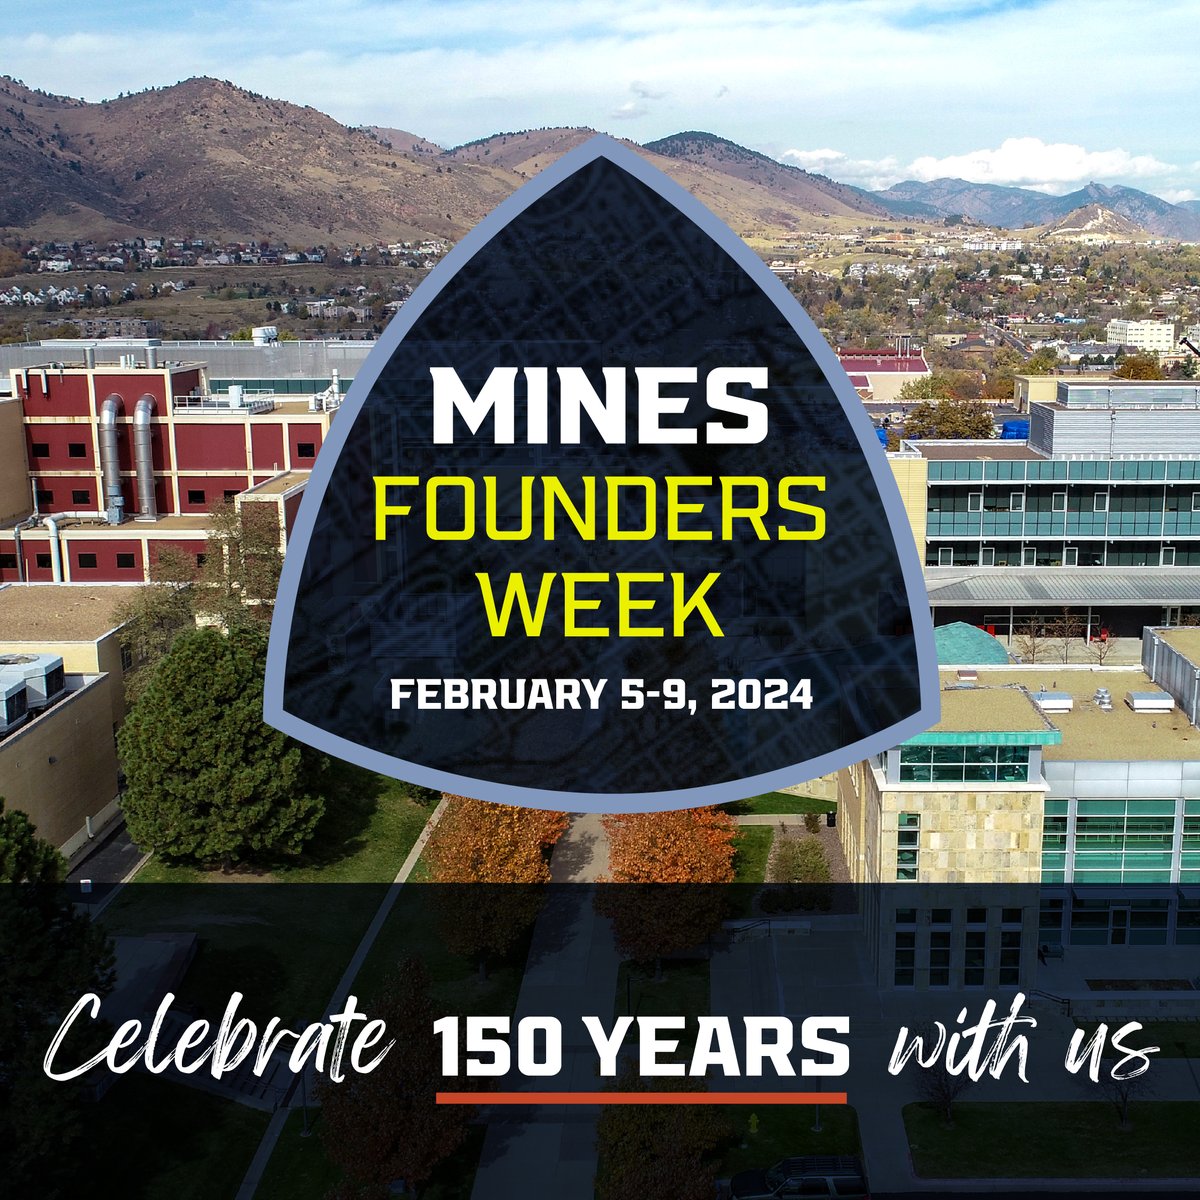 We're kicking off our #MINES150 celebrations in just a few weeks! Join us February 5-9 for a Mines birthday party, the grand opening of Labriola Innovation District and more! Check out our anniversary site with all the celebration info you need here: 150.mines.edu/celebrations/